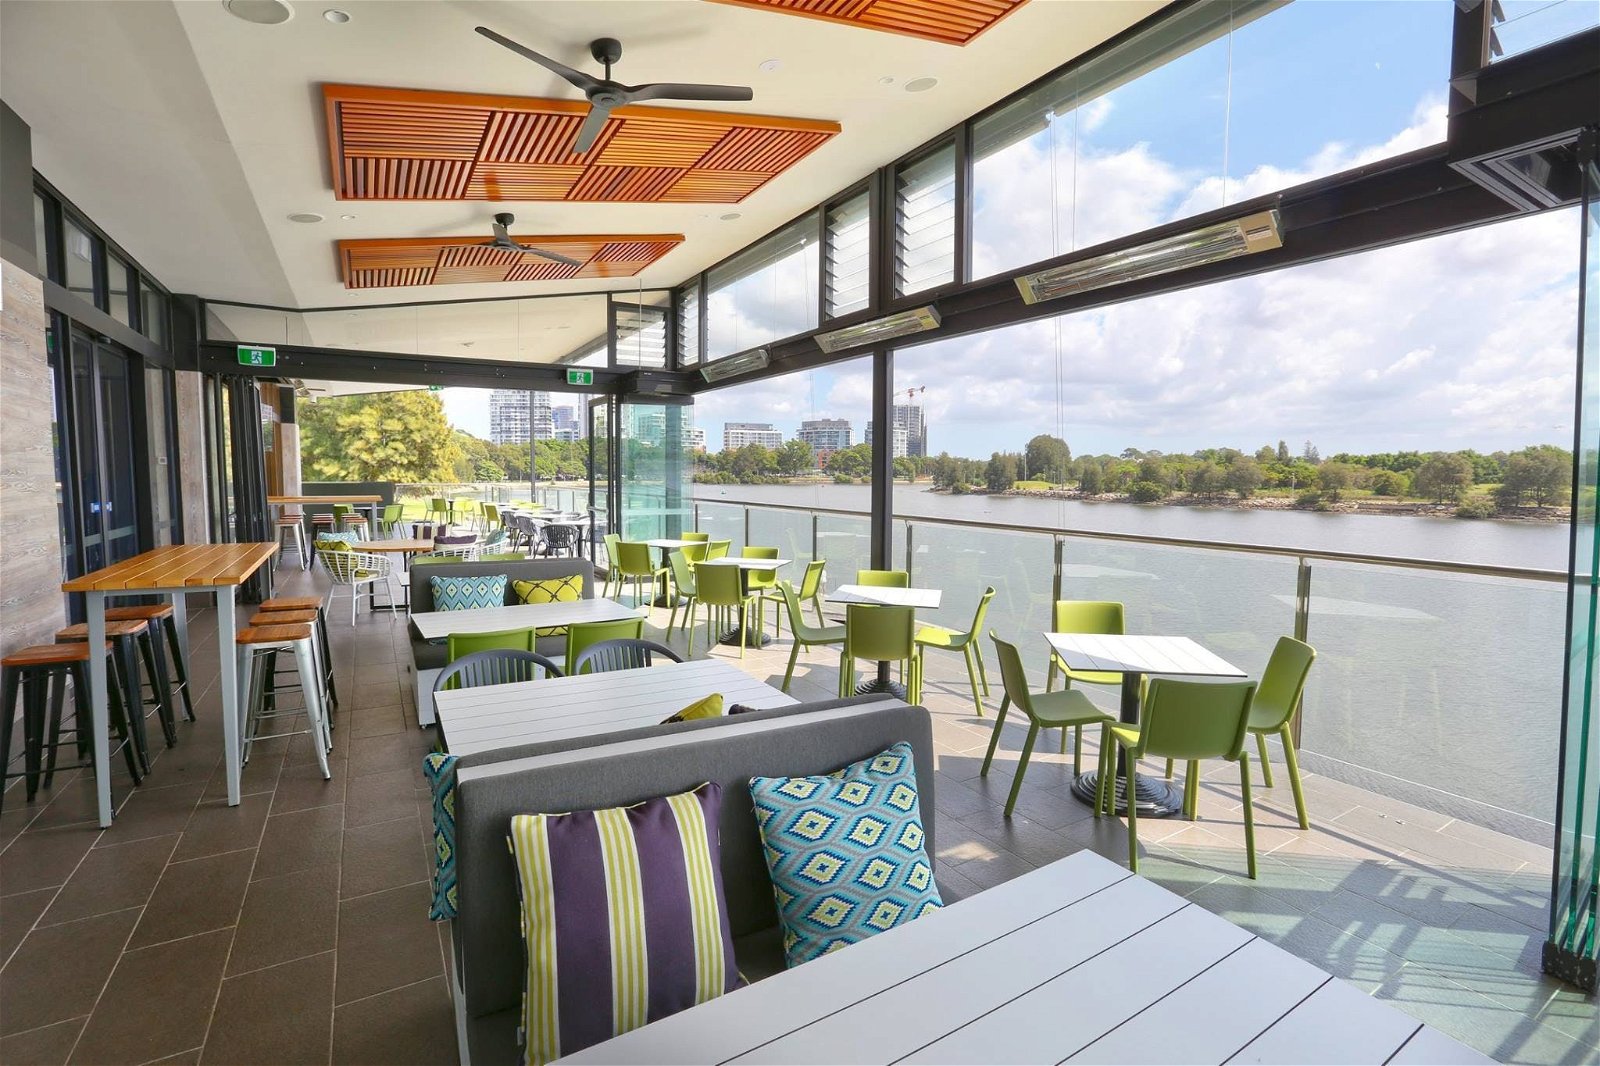 Mint - Rowers On Cooks River - Pubs Sydney